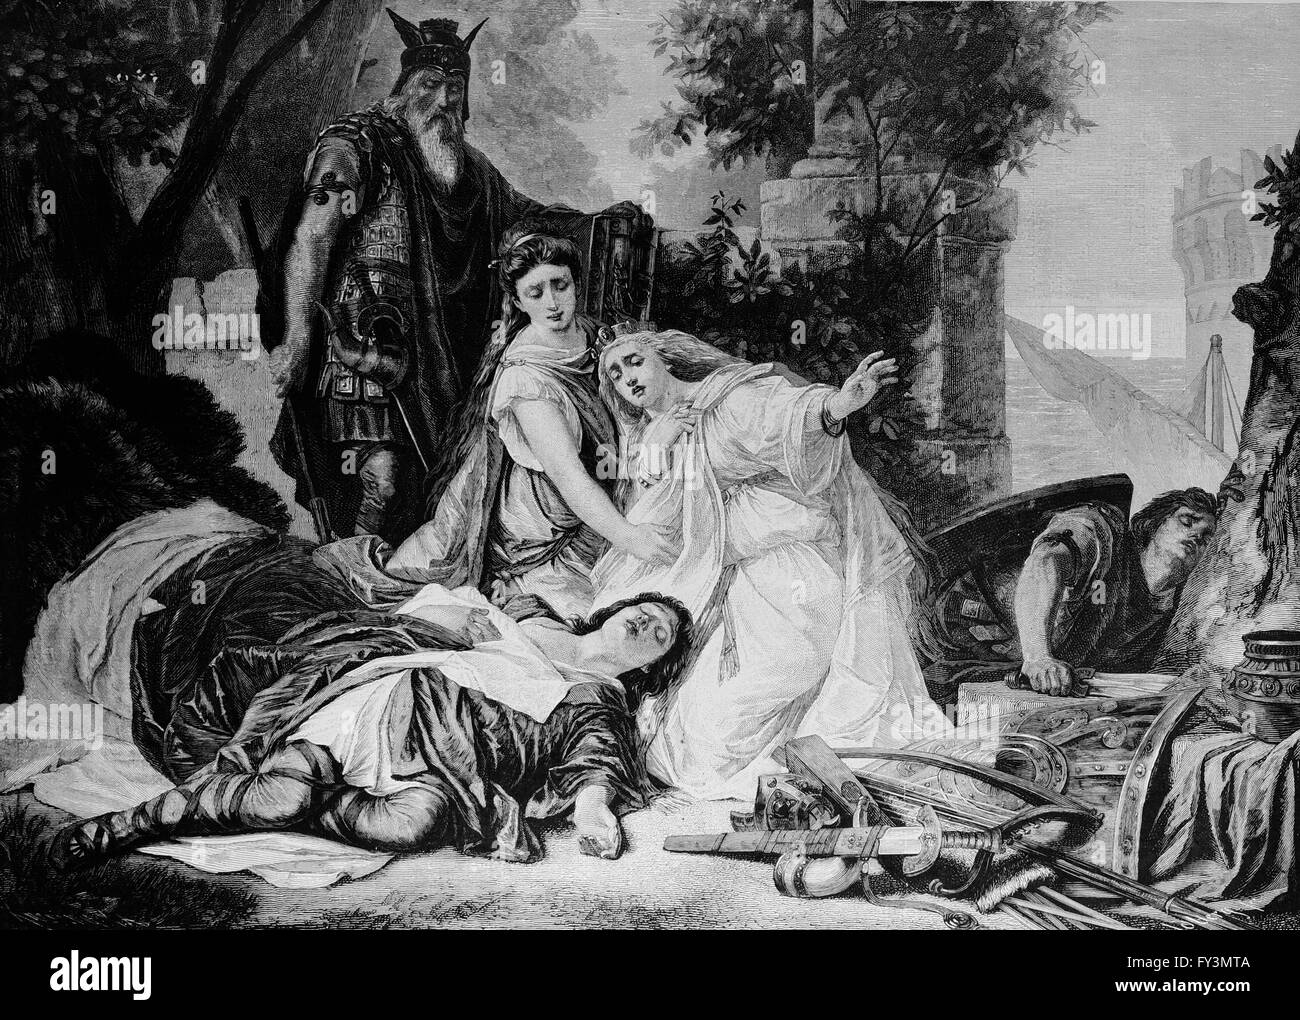 The Death of Tristan. German composer Richard Wagner 1813-1883. 'Tristan and Isolde'. Engraving, c. 1890. Stock Photo